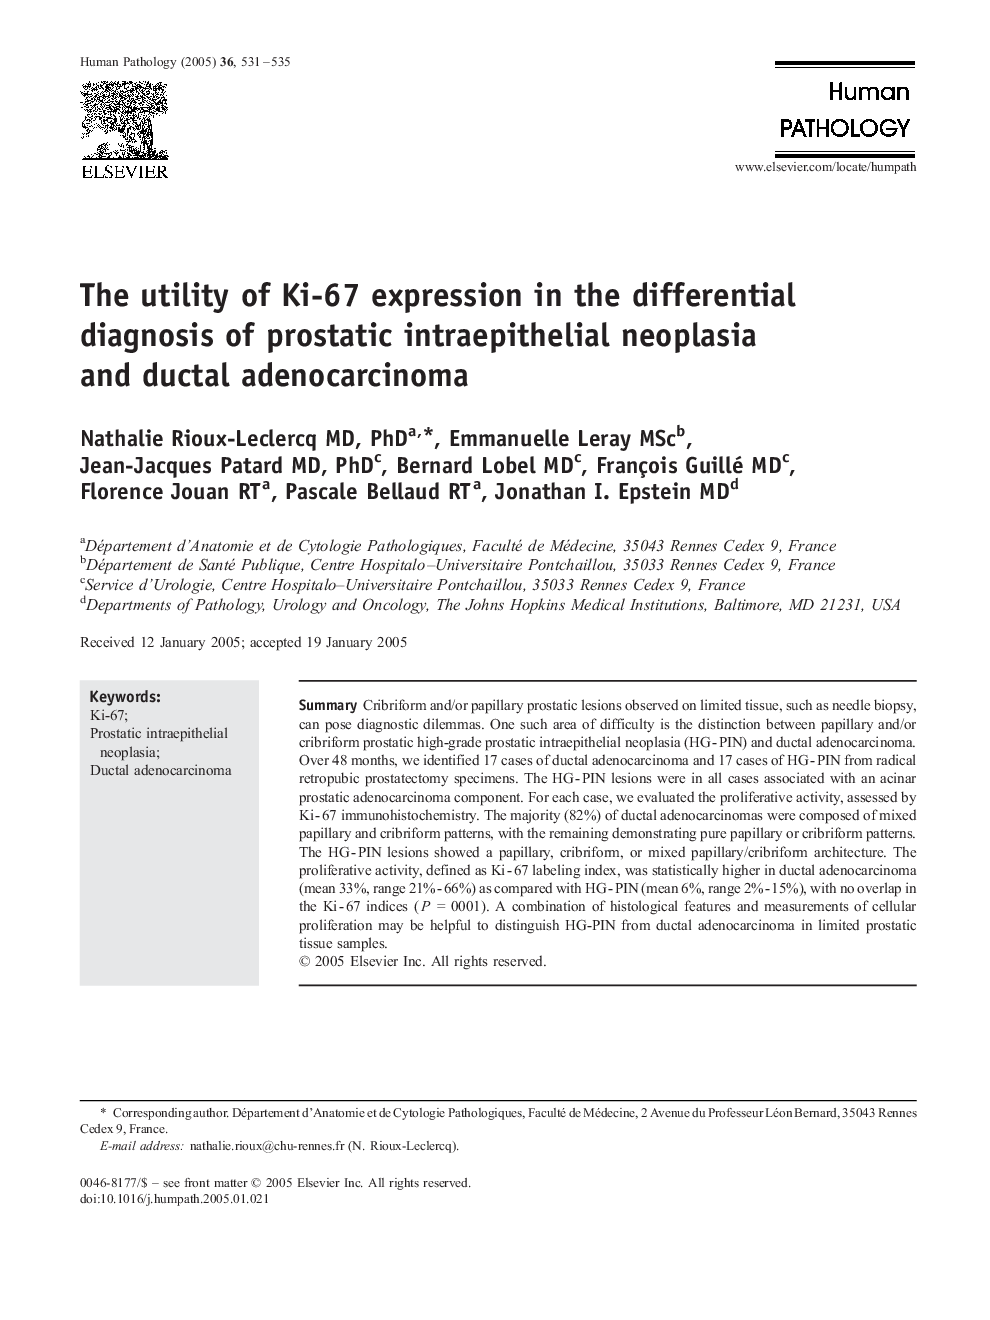 The utility of Ki-67 expression in the differential diagnosis of prostatic intraepithelial neoplasia and ductal adenocarcinoma